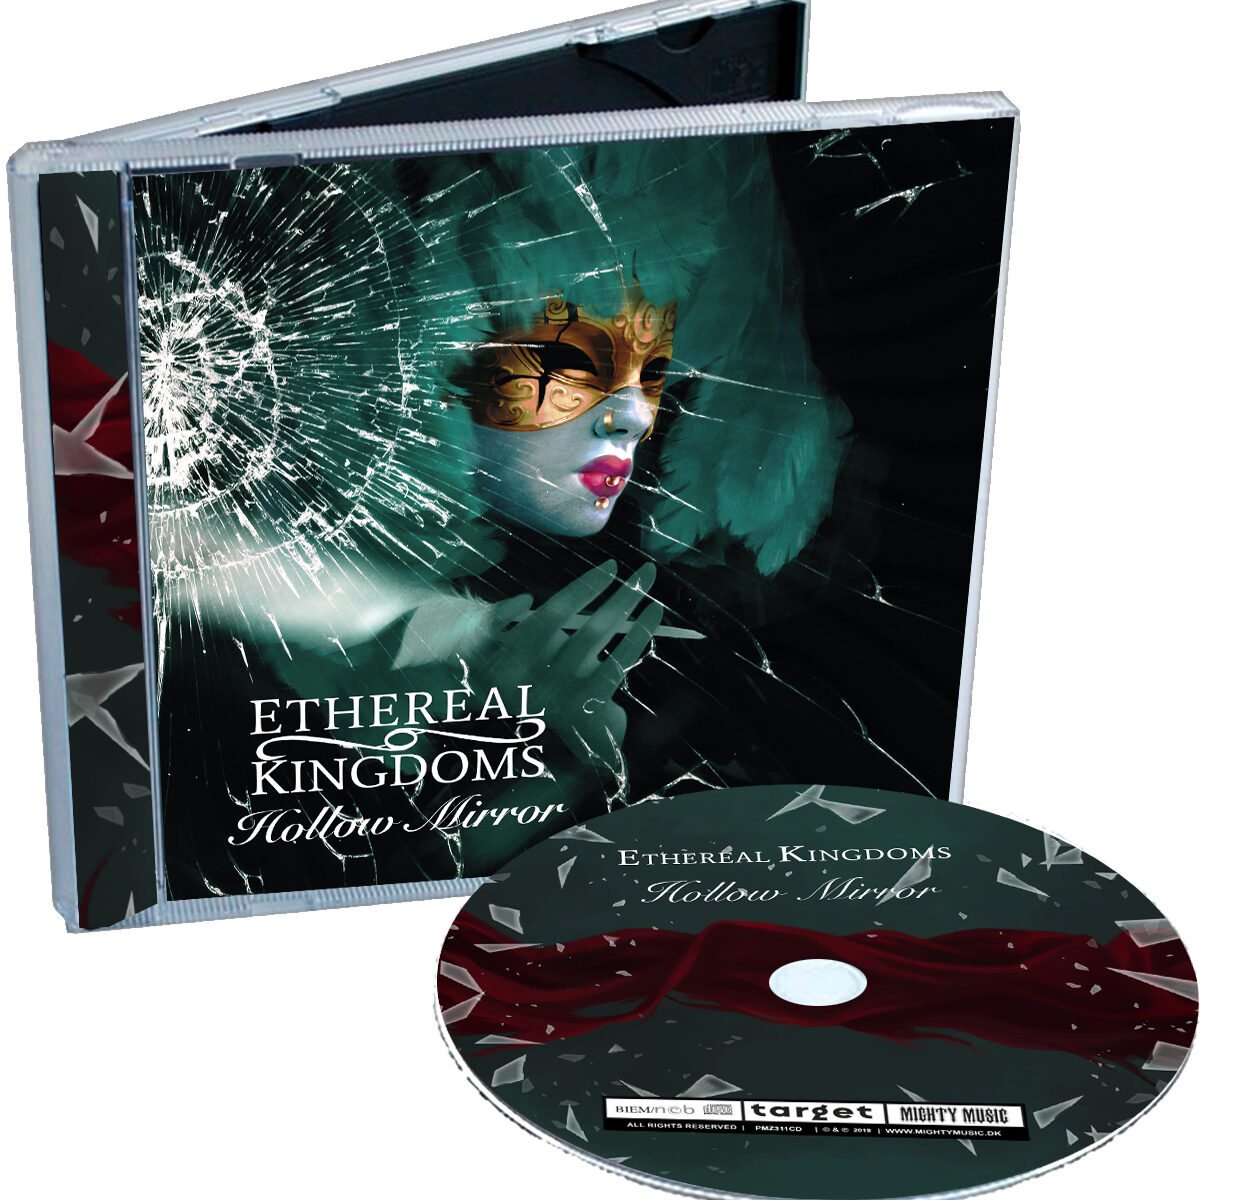 Ethereal Kingdoms Hollow Mirror CD